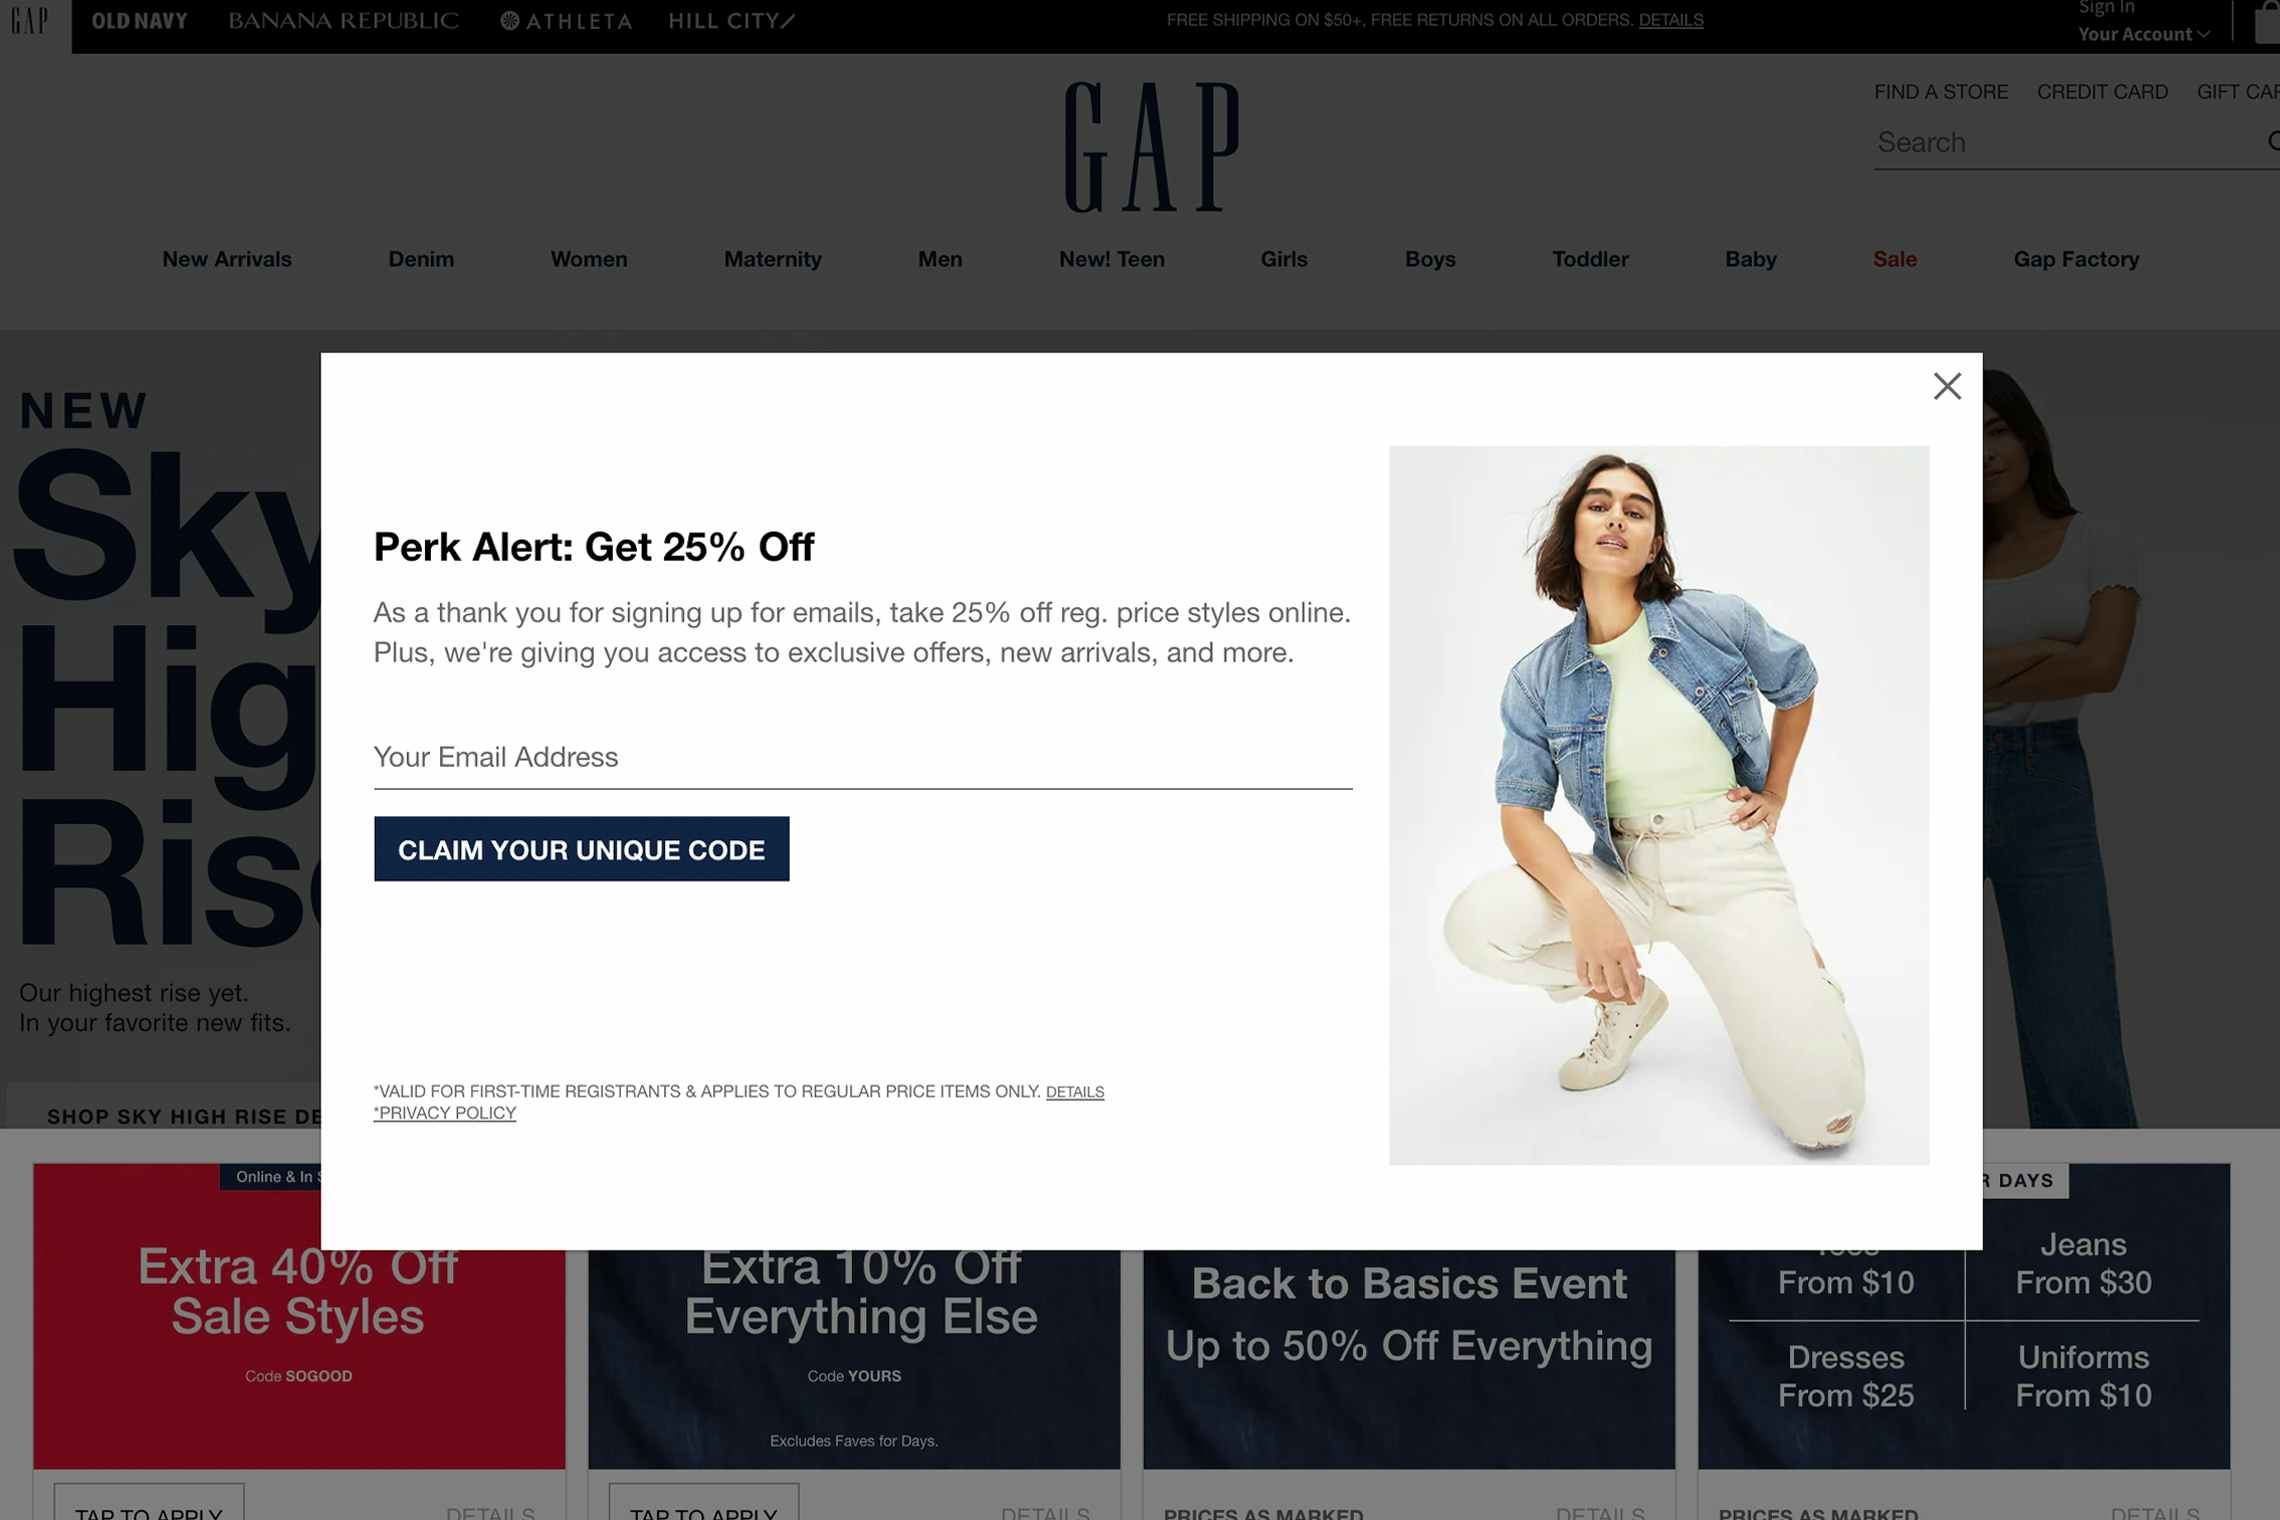 GAP clothing store website welcome coupon form.